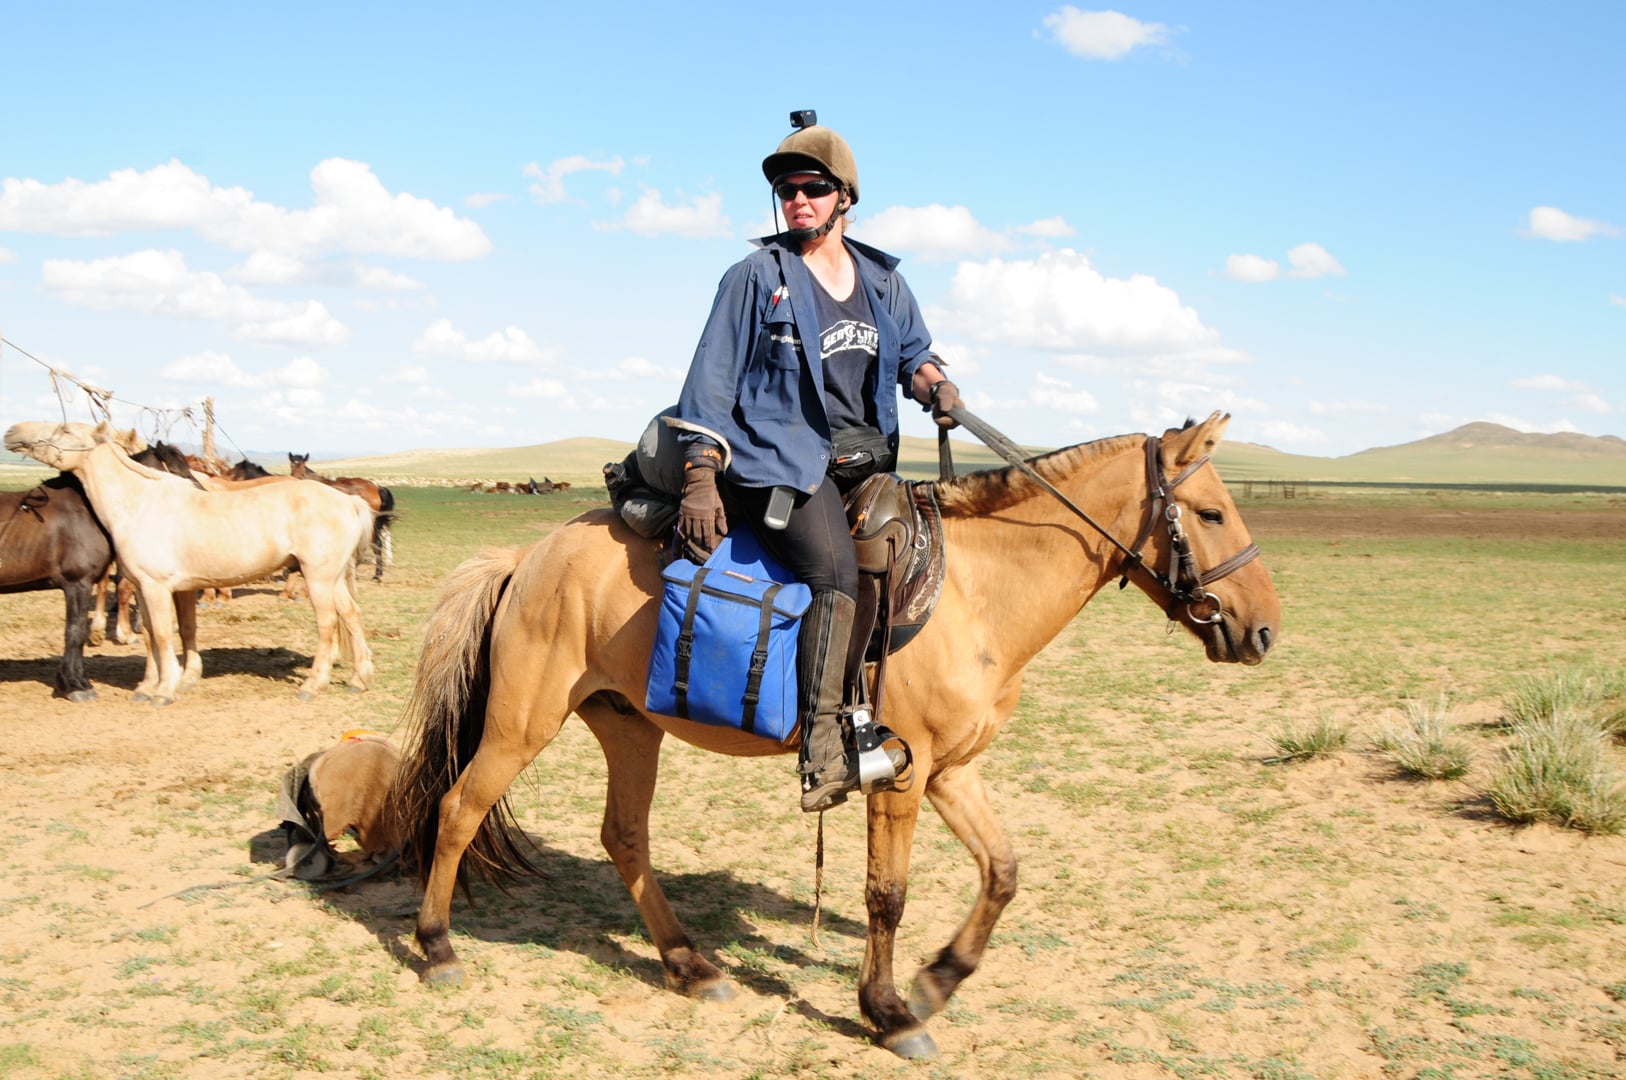 Holly Budge during her 1000km horse ride through the Mongolian desert.